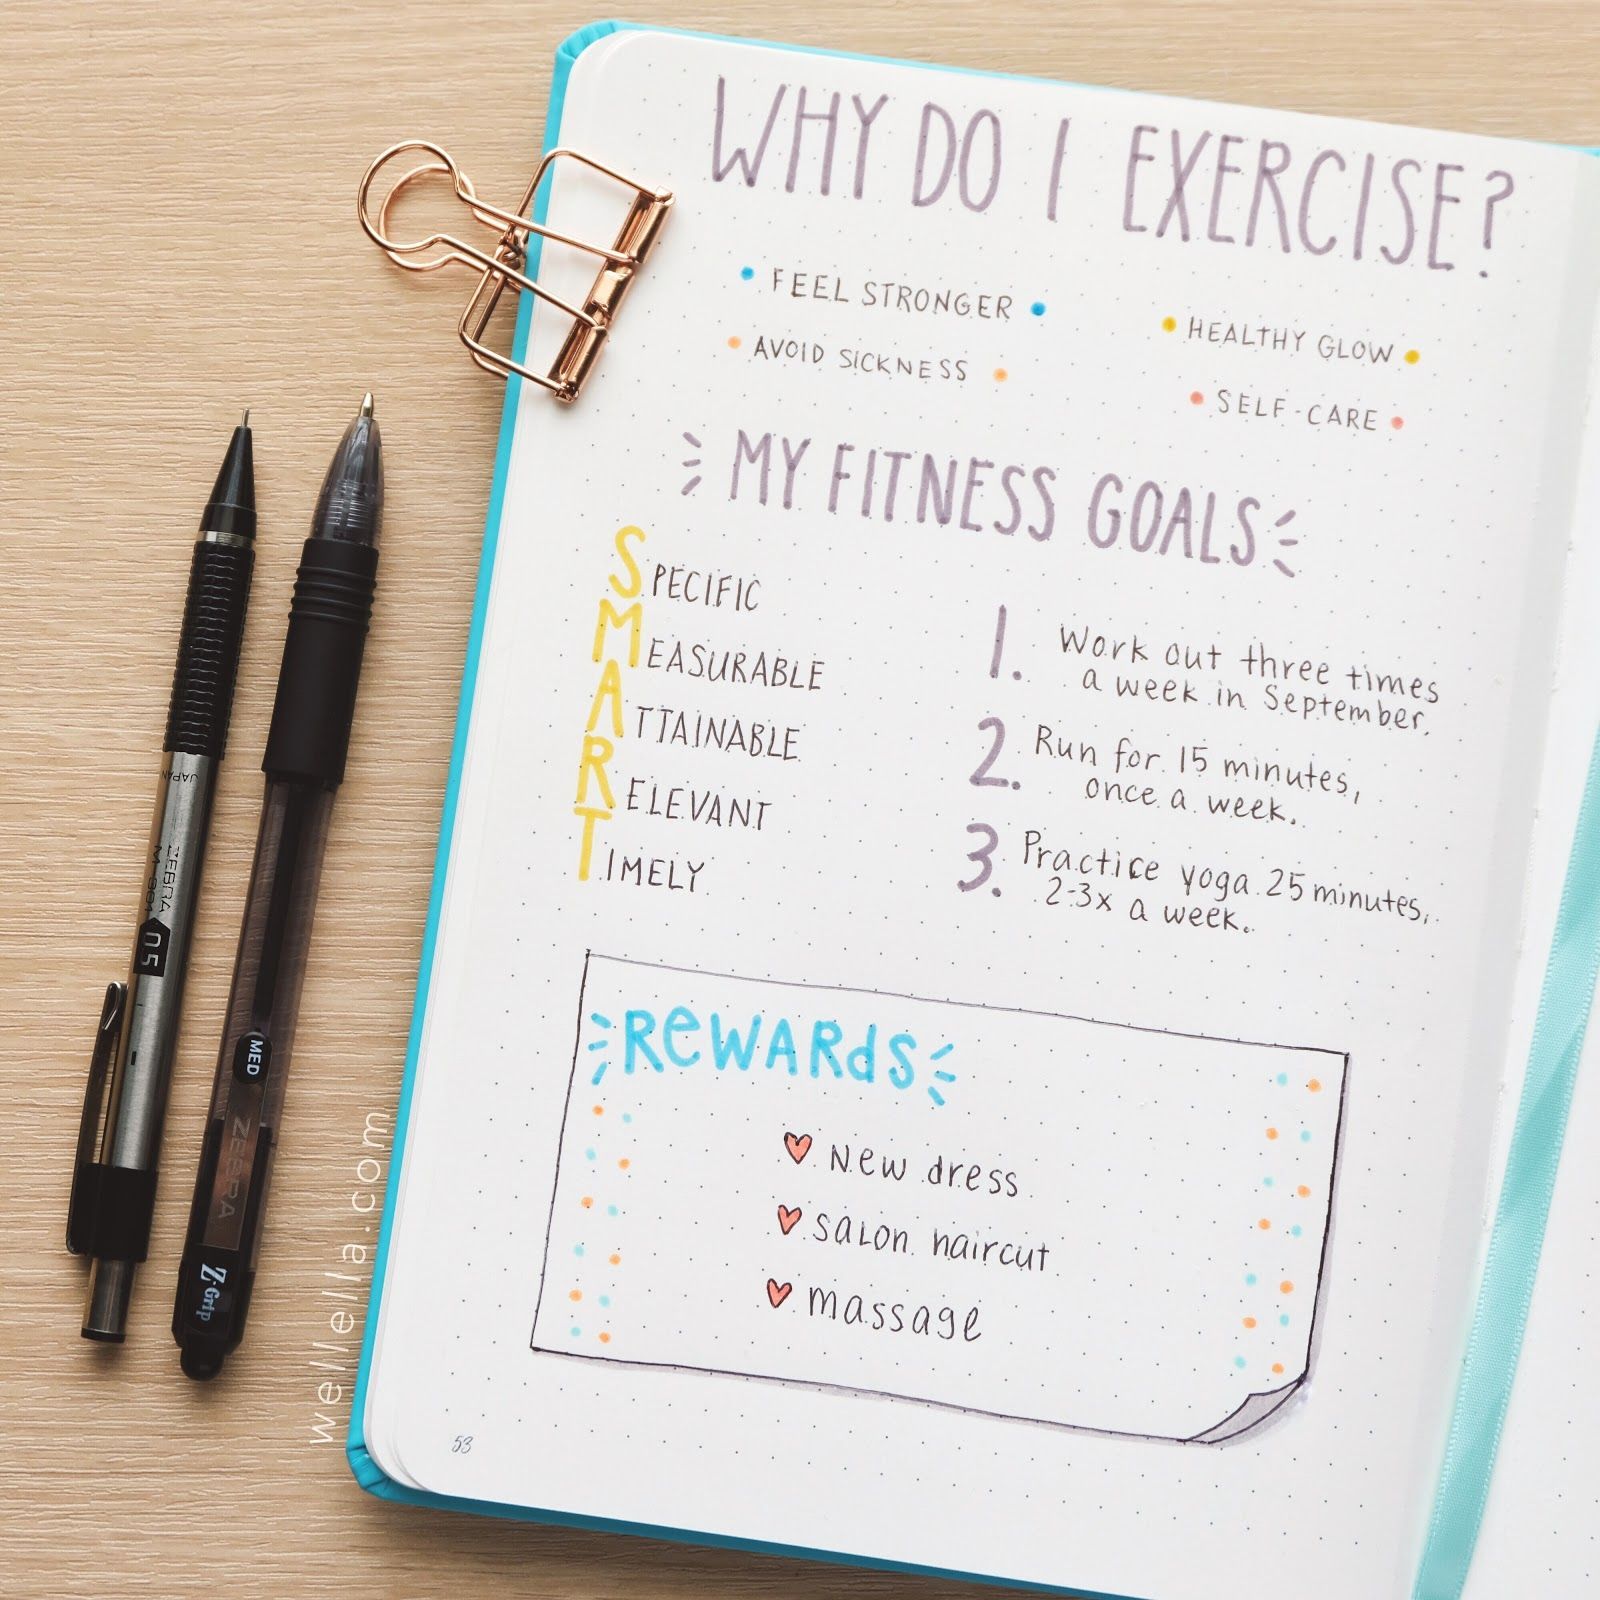 Bujo - Fitness Bullet Journal Page Ideas To Help You Track Your Exercise Goals In 2020 -   17 fitness Journal exercise ideas